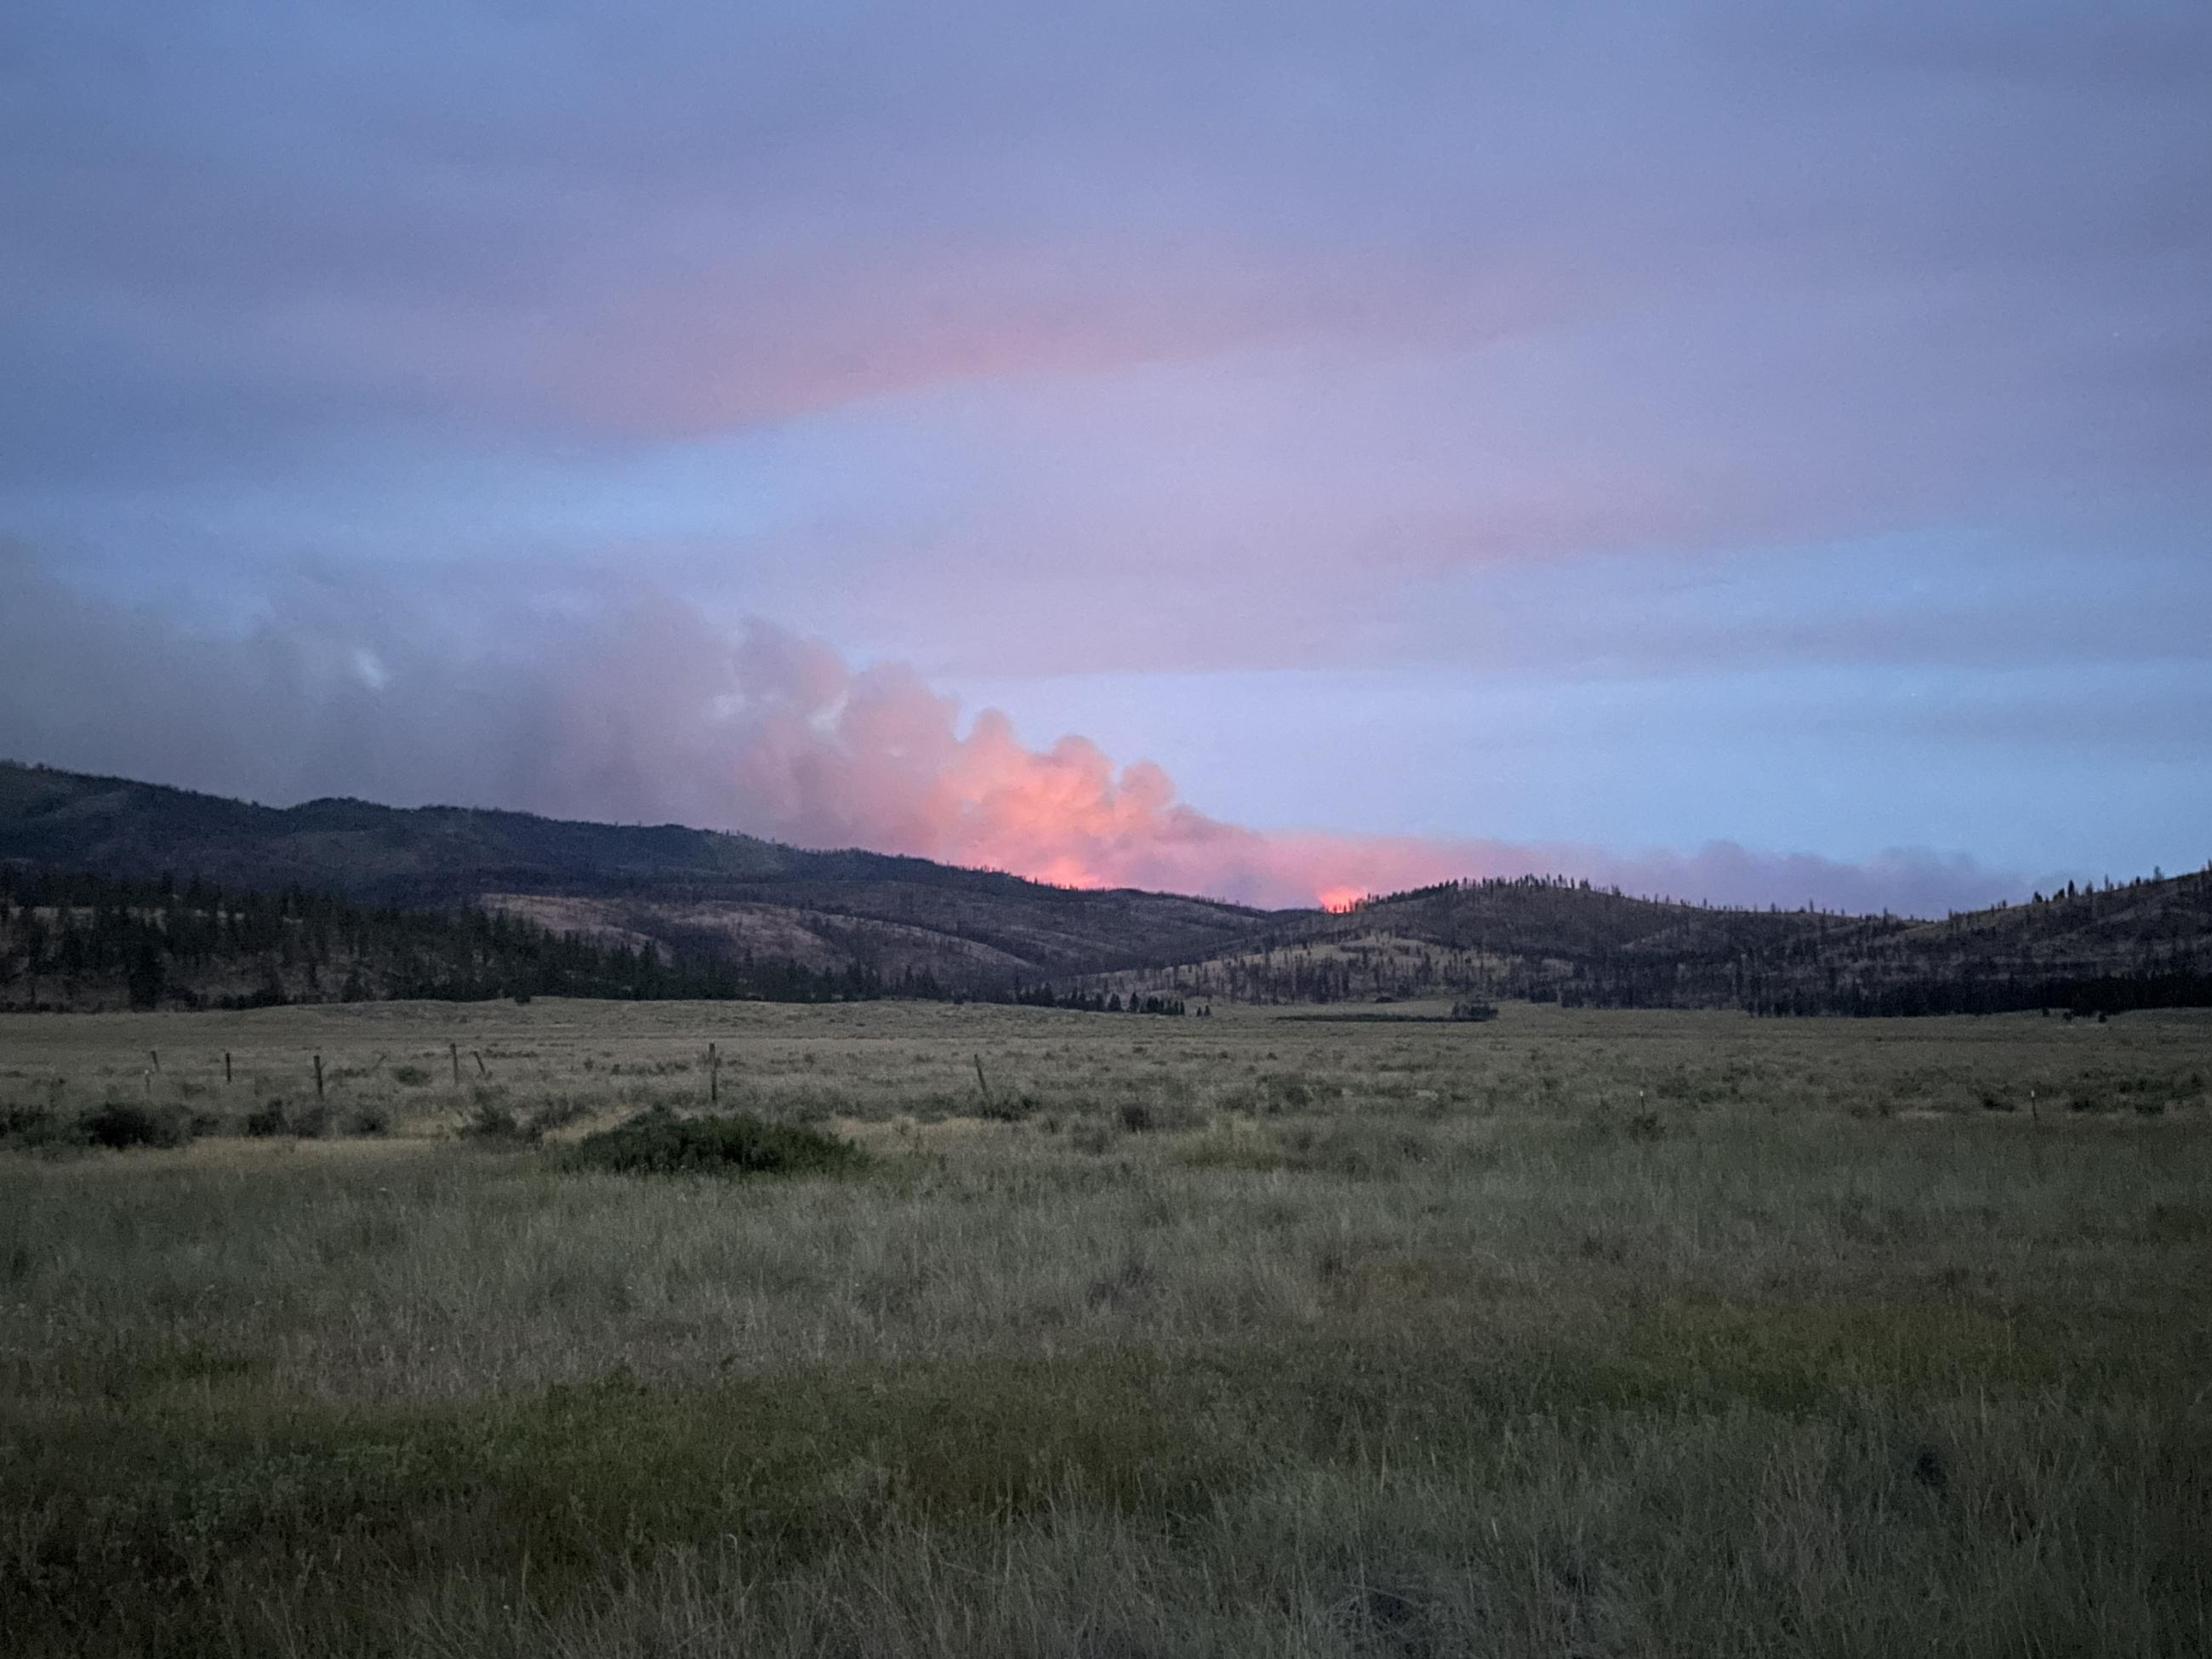 a field of grass and sage brush in the fore ground with a pink glow from a fire in the clouds over mountains in the background 